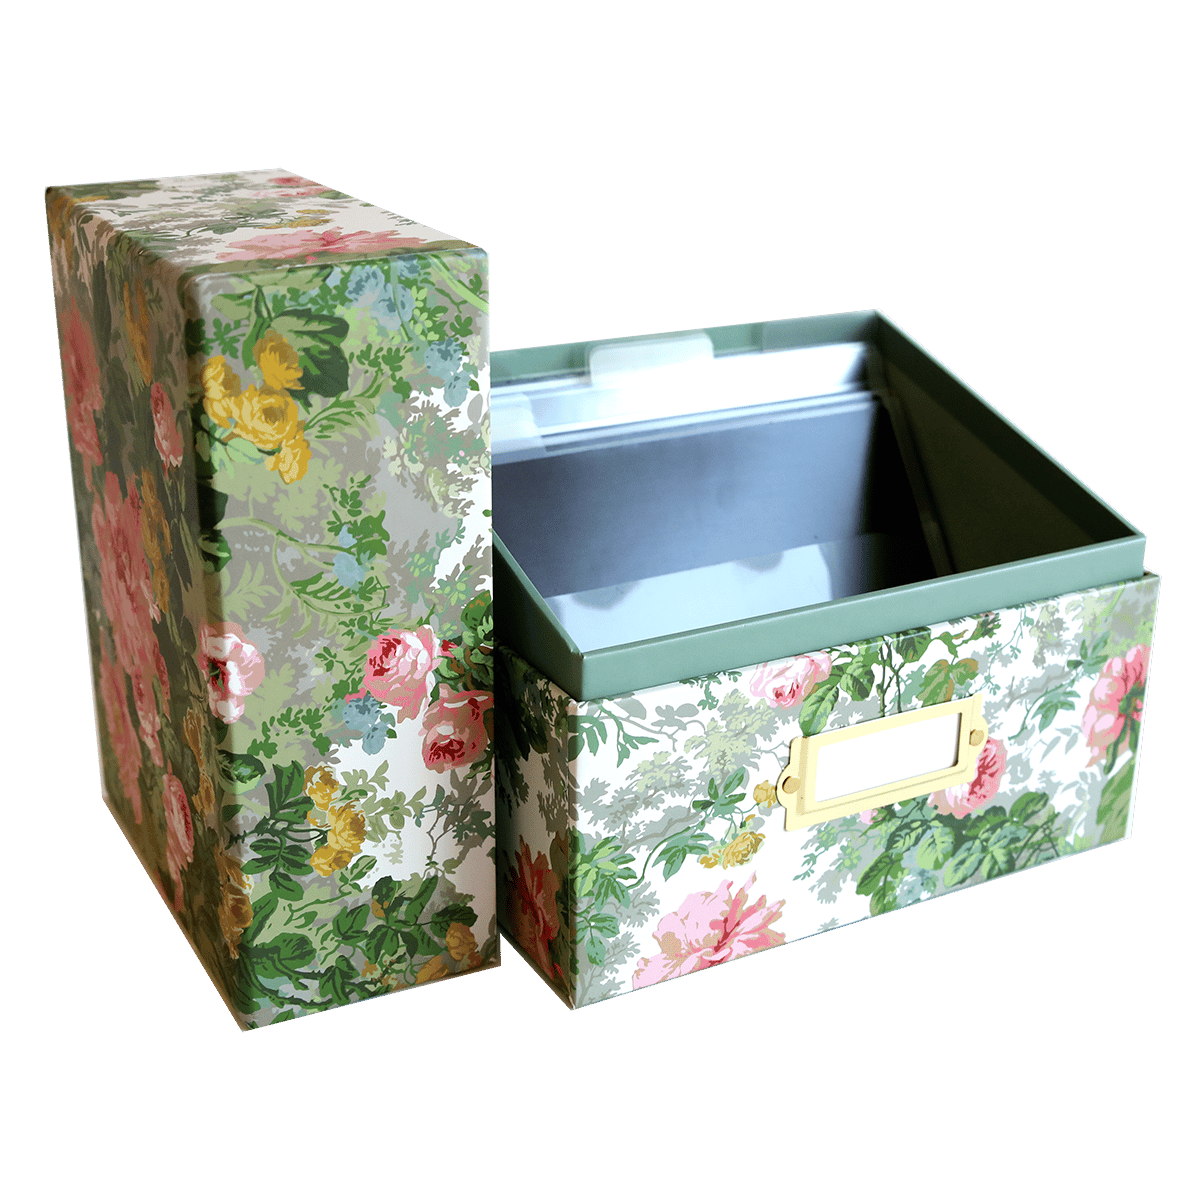 two boxes with floral designs on them.